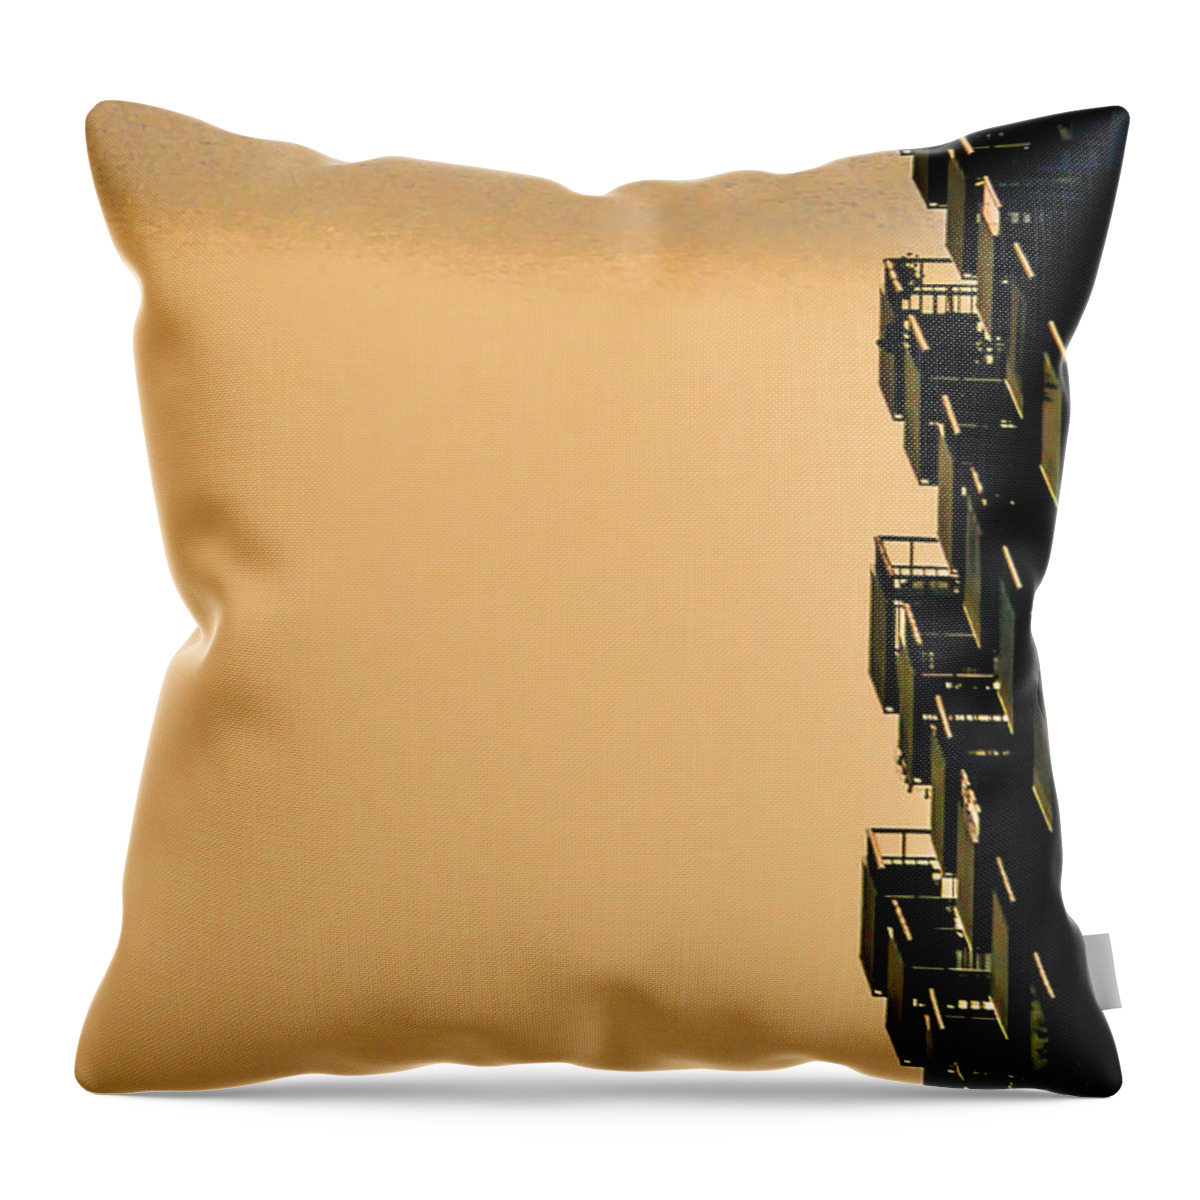 Europe Throw Pillow featuring the photograph Inception 2 by Alexander Farnsworth